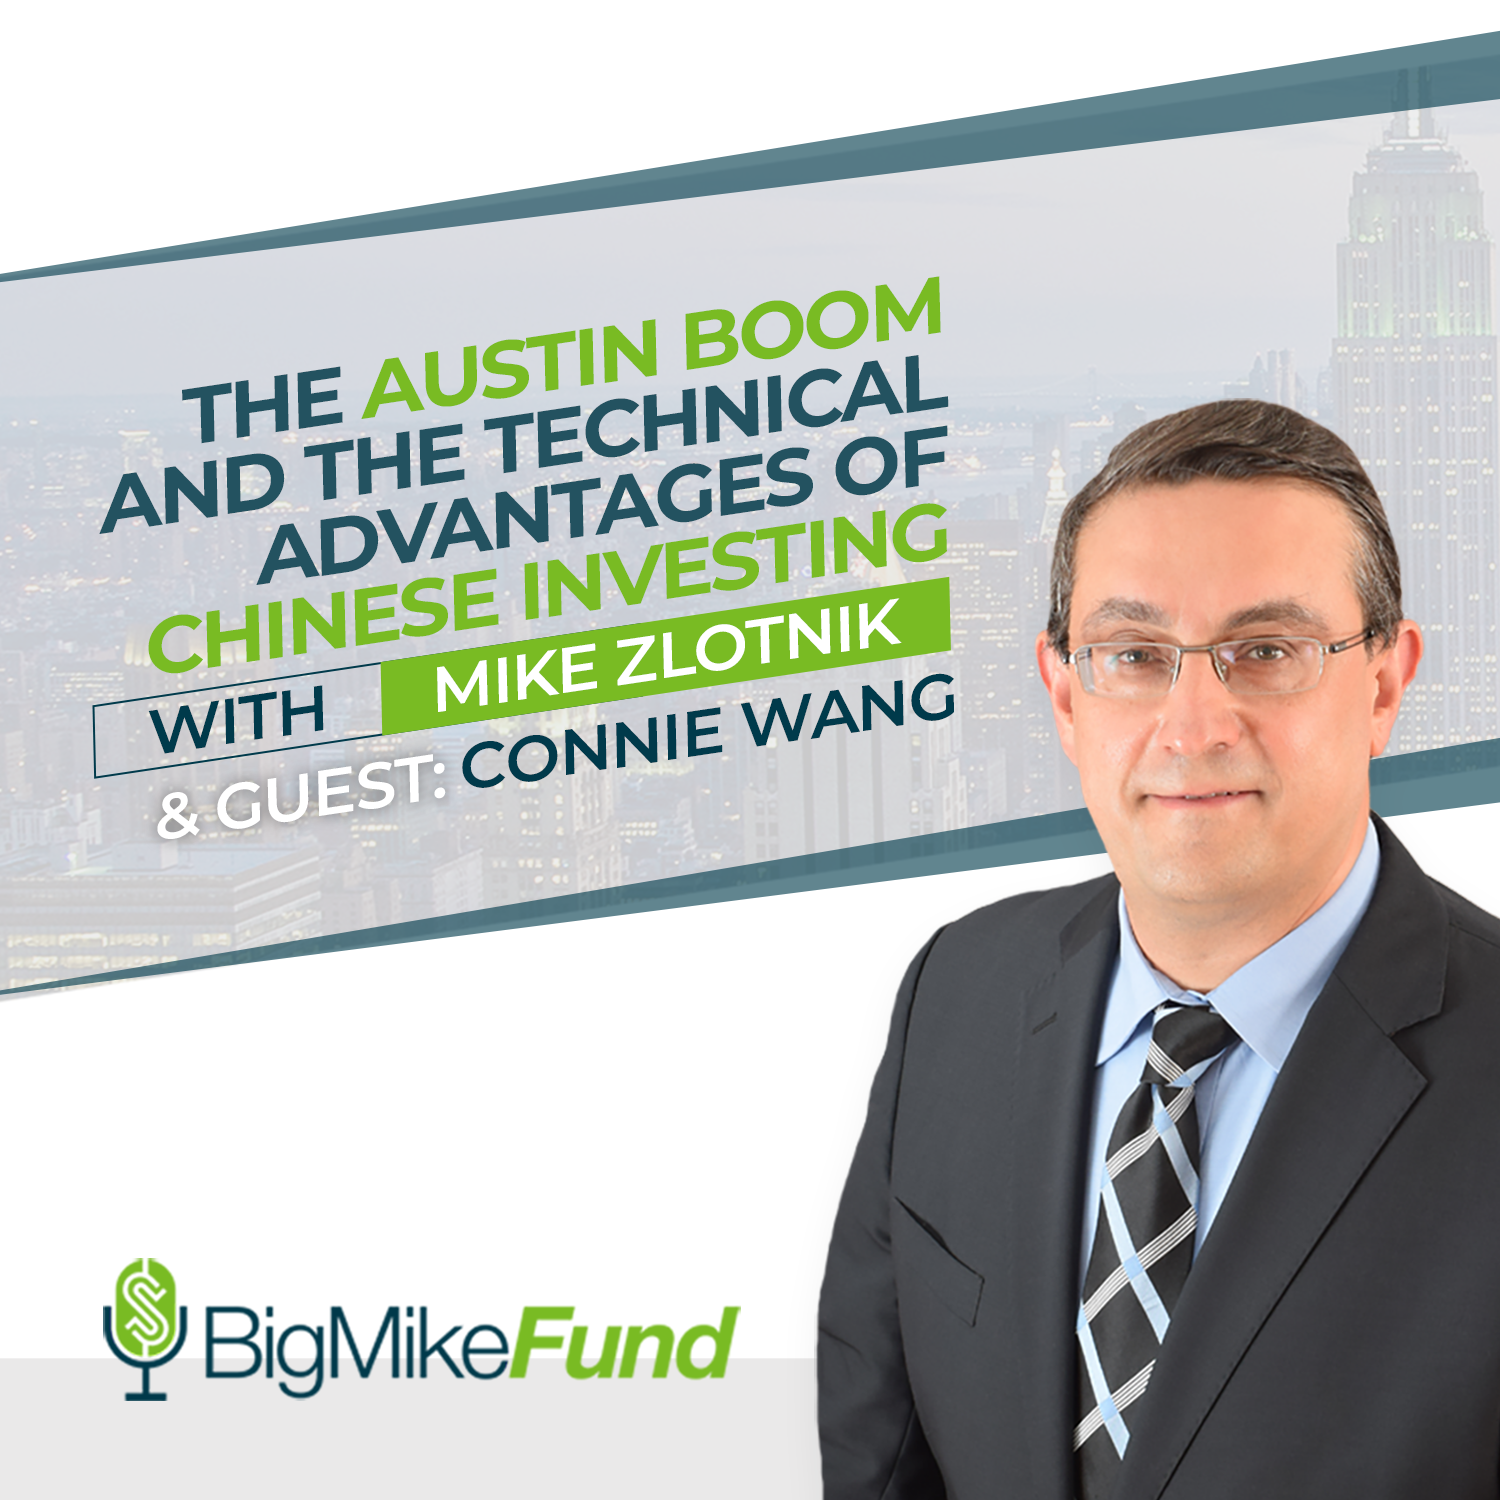 116: The Austin Boom and the Technical Advantages of Chinese Investing with Connie Wang